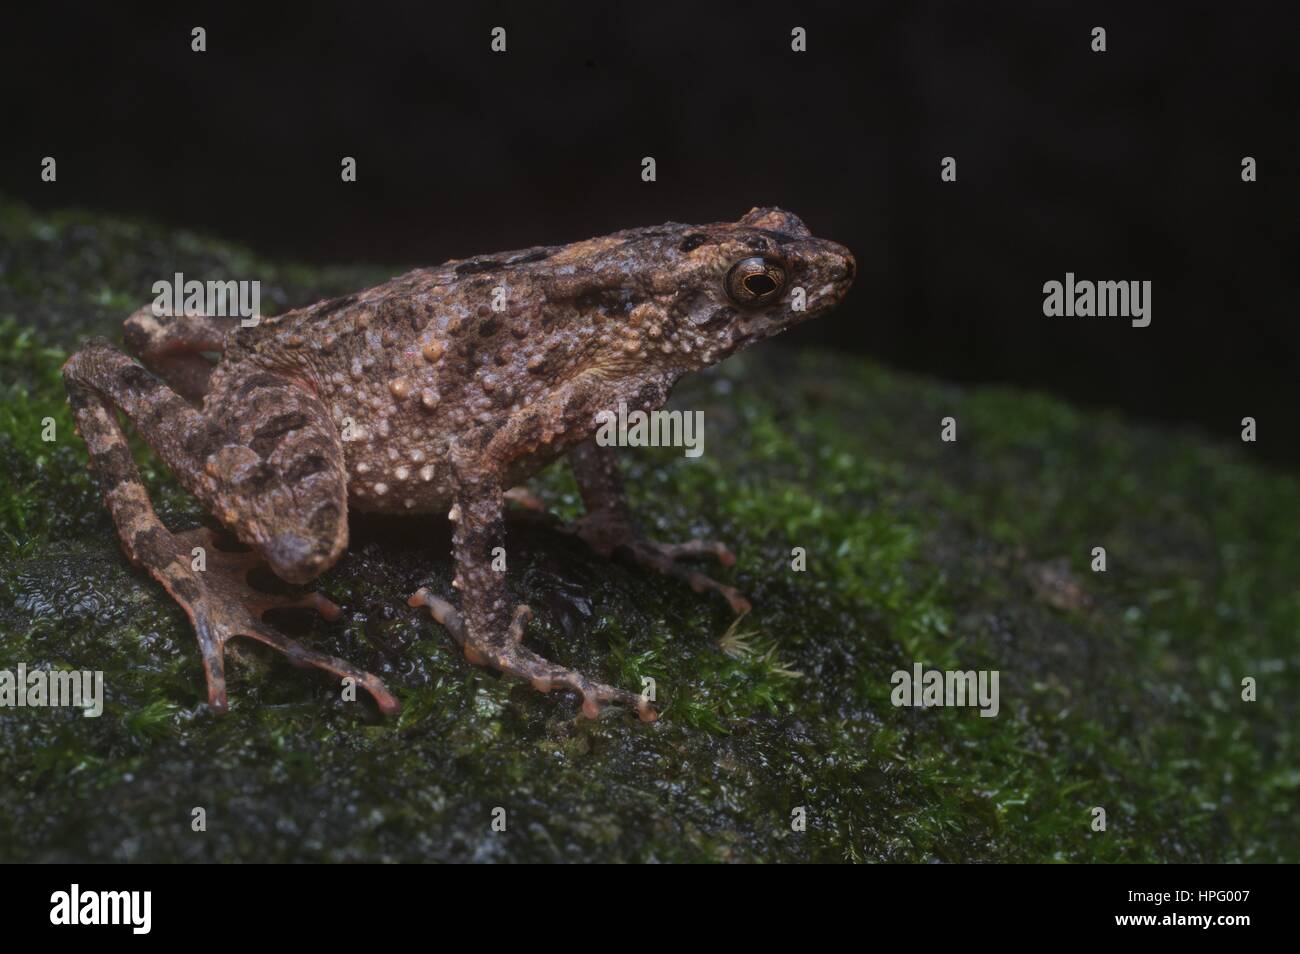 A Cross Toad (Leptophryne borbonica) on a mossy riverside rock in the rainforest in Batang Kali, Selangor, Malaysia Stock Photo